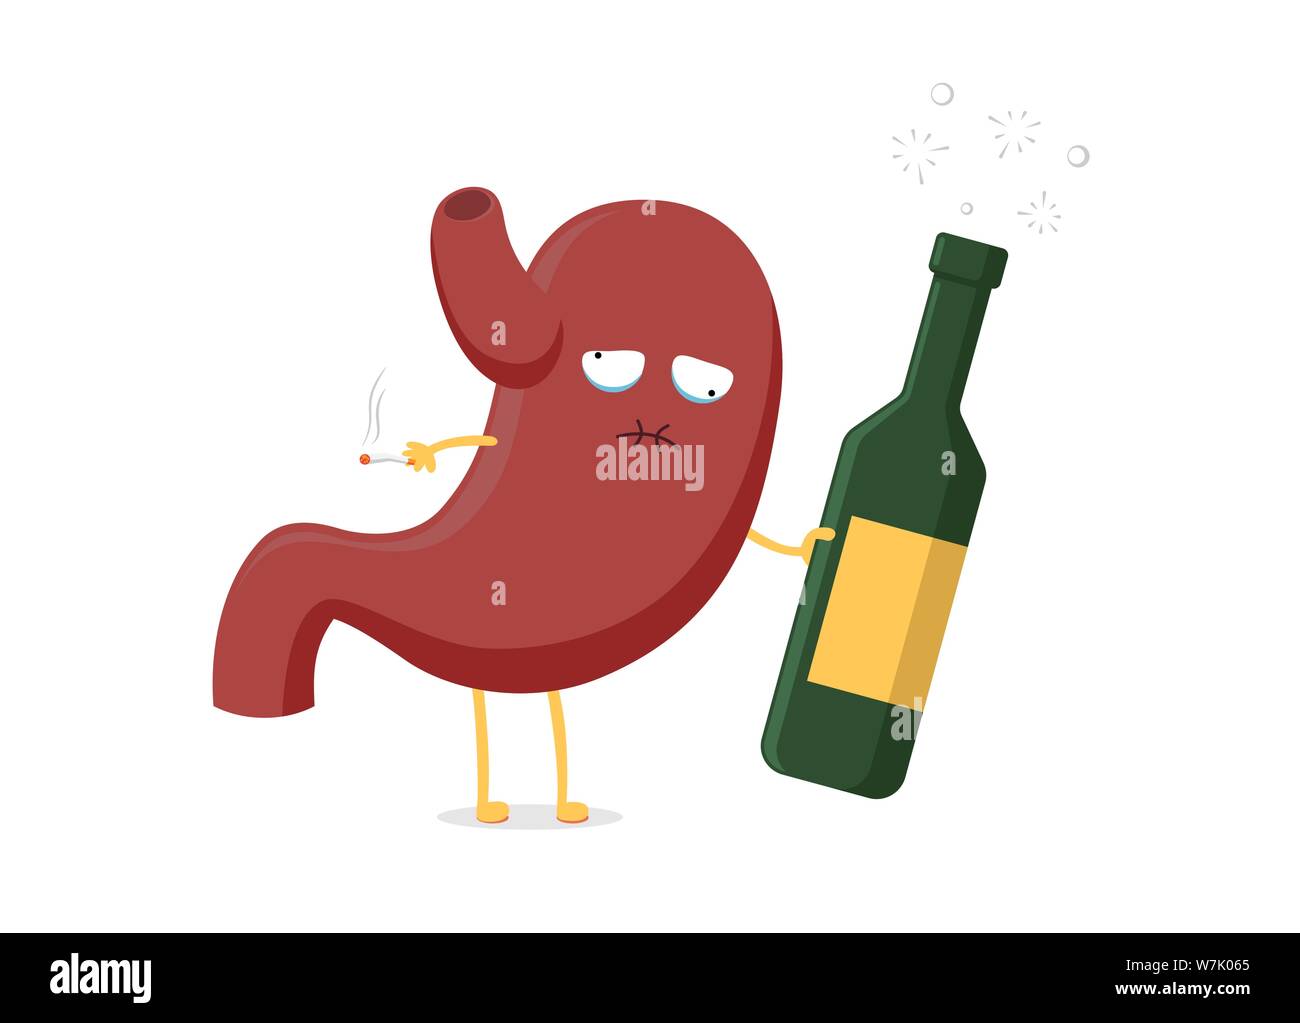 Sad unhealthy sick drunk stomach character with alcohol bottle and cigarette. Human digestive system unhealthy cartoon organ indigestion. Vector ache disease illustration Stock Vector